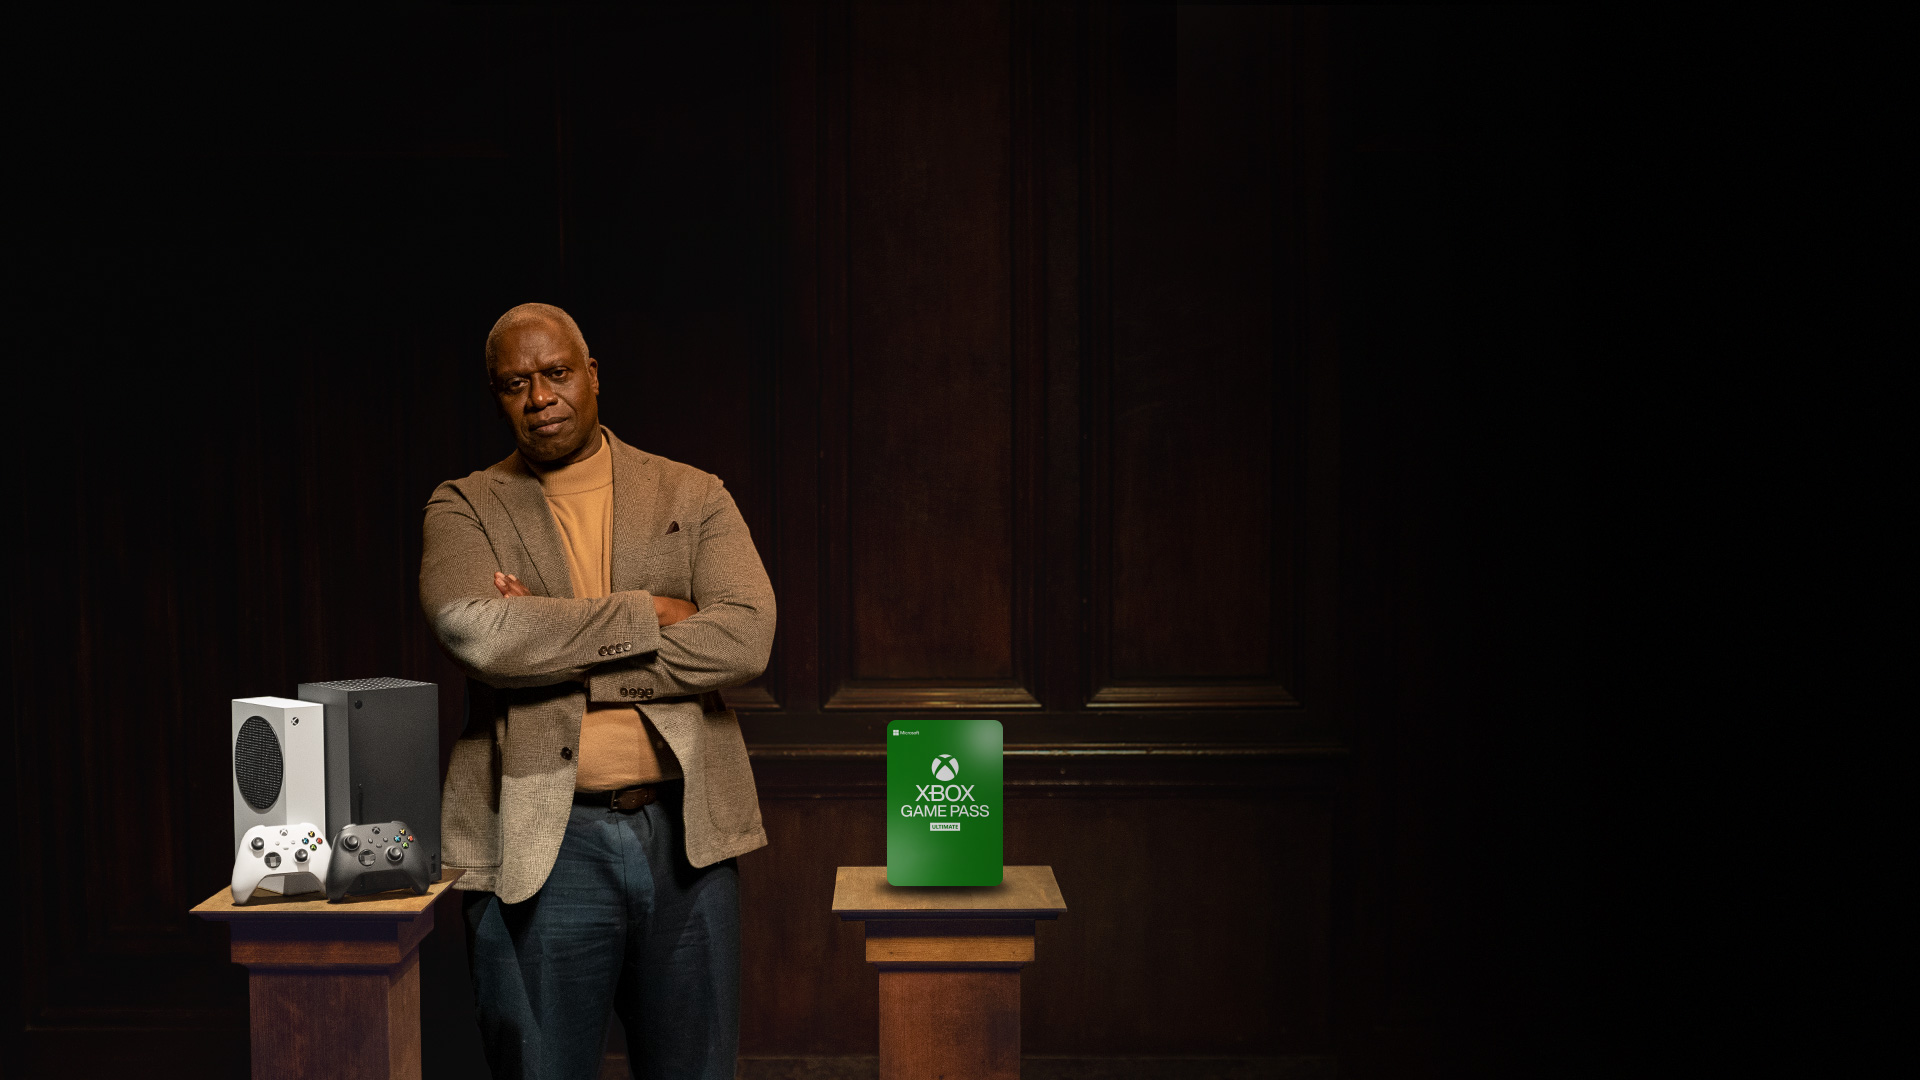 Xbox All Access. Andre Braugher stands with his arms crossed behind two pillars that are holding Xbox Series X and Xbox Series S consoles, and 24 months of Xbox Game Pass Ultimate.